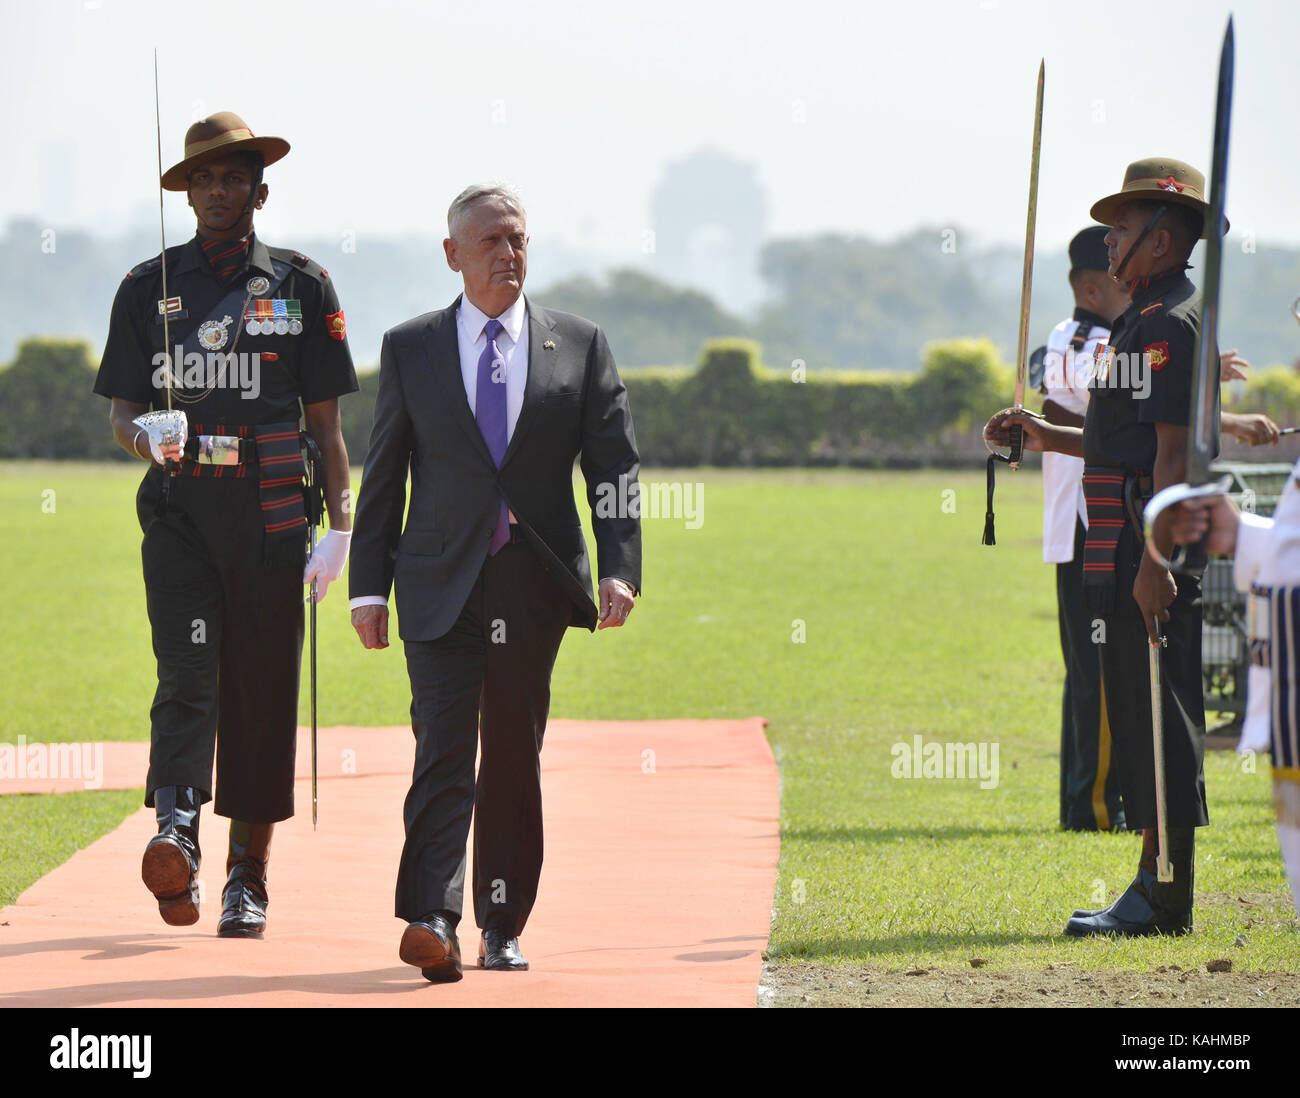 (170926) -- NEW DELHI, Sept. 26, 2017 (xinhua) -- U.S. Defense Secretary Jame Mattis(Front) inspects Indian Guards of Honor outside Indian Defence Ministry upon his arrival in New Delhi, capital of India, on September 26, 2017. Mattis arrived in New Delhi on a two-day visit to India, officials said Tuesday. (Xinhua/Partha Sarkar)(swt) Stock Photo